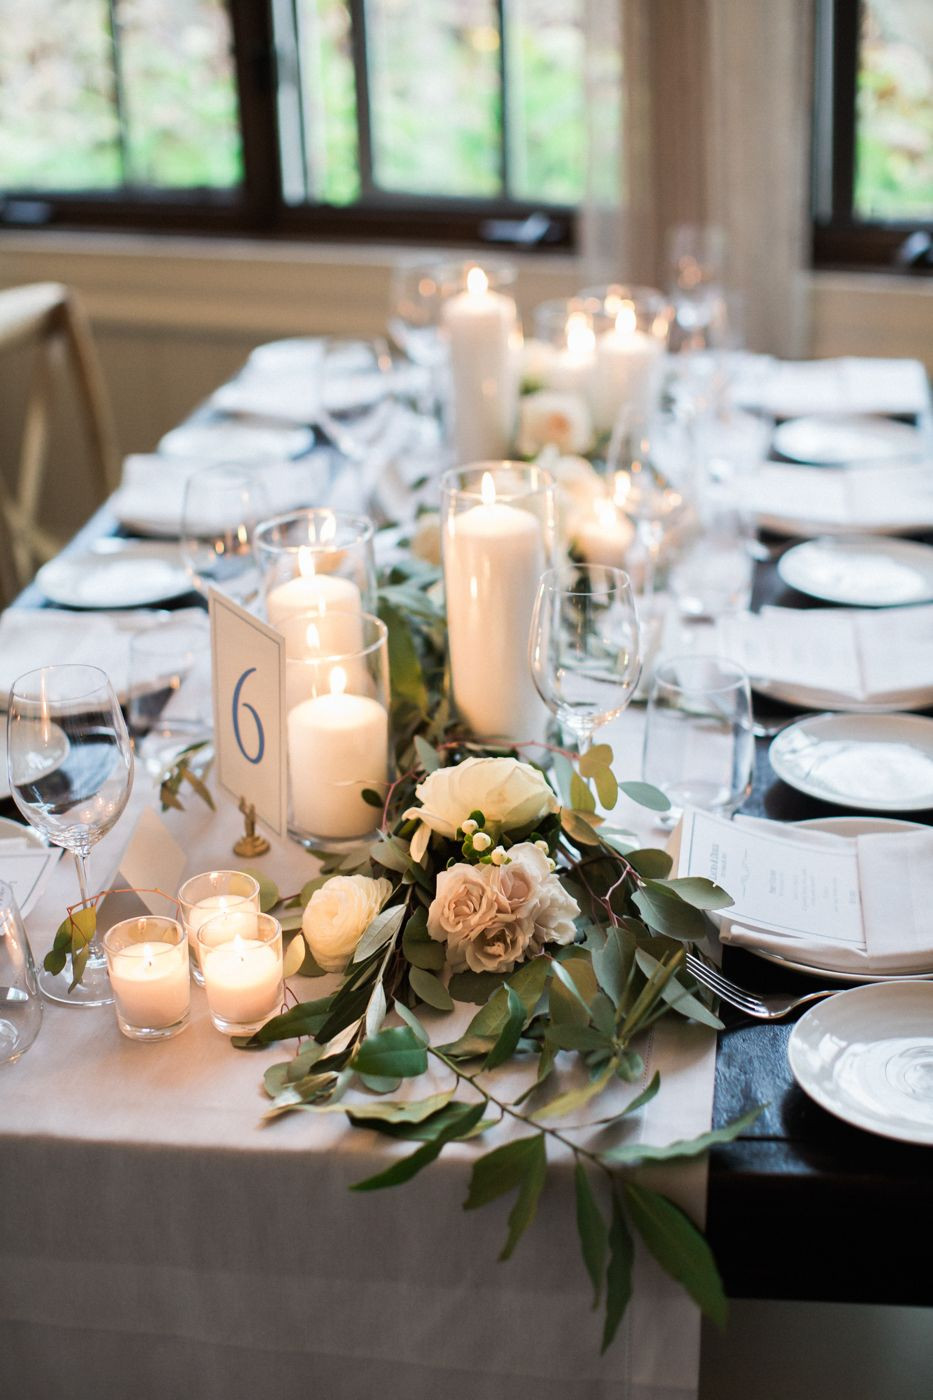 How To Decorate A Wedding Table
 We Found the Space for Your Next Weekend Retreat in 2019